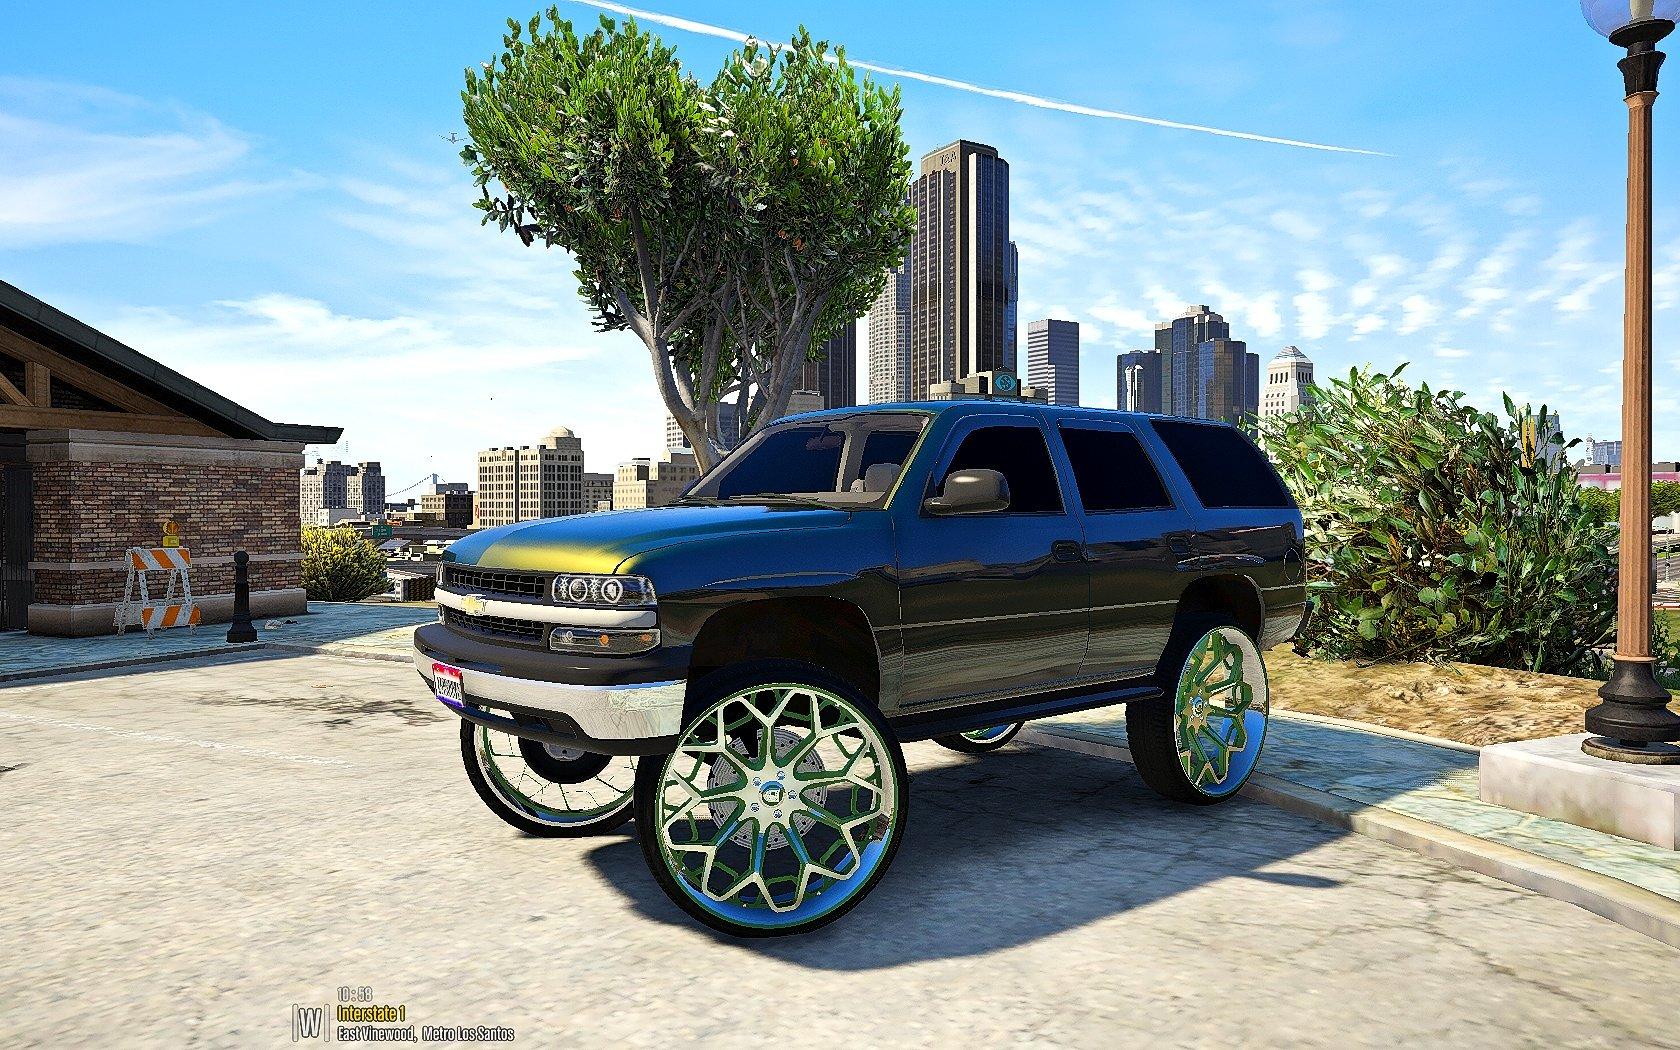 Chevy Tahoe [Replace] Regular and Donk versions